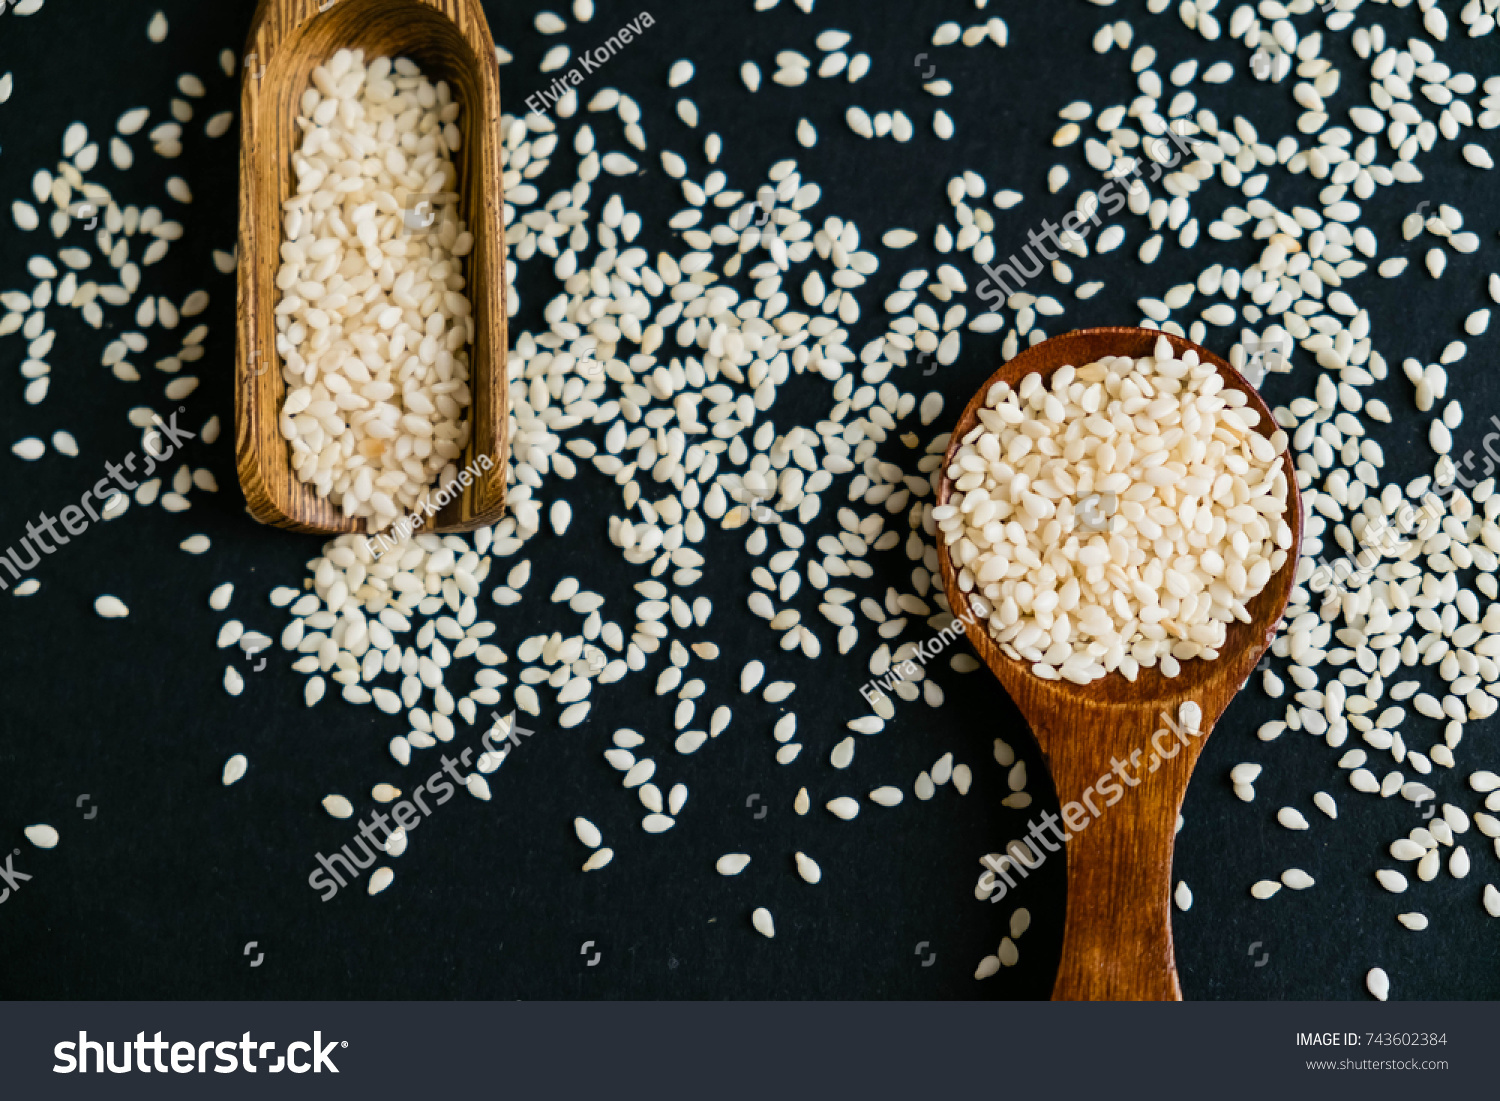 Organic Natural Sesame Seeds Wooden Spoon Backgrounds Textures Stock Image 743602384,Non Dairy Cheese Publix